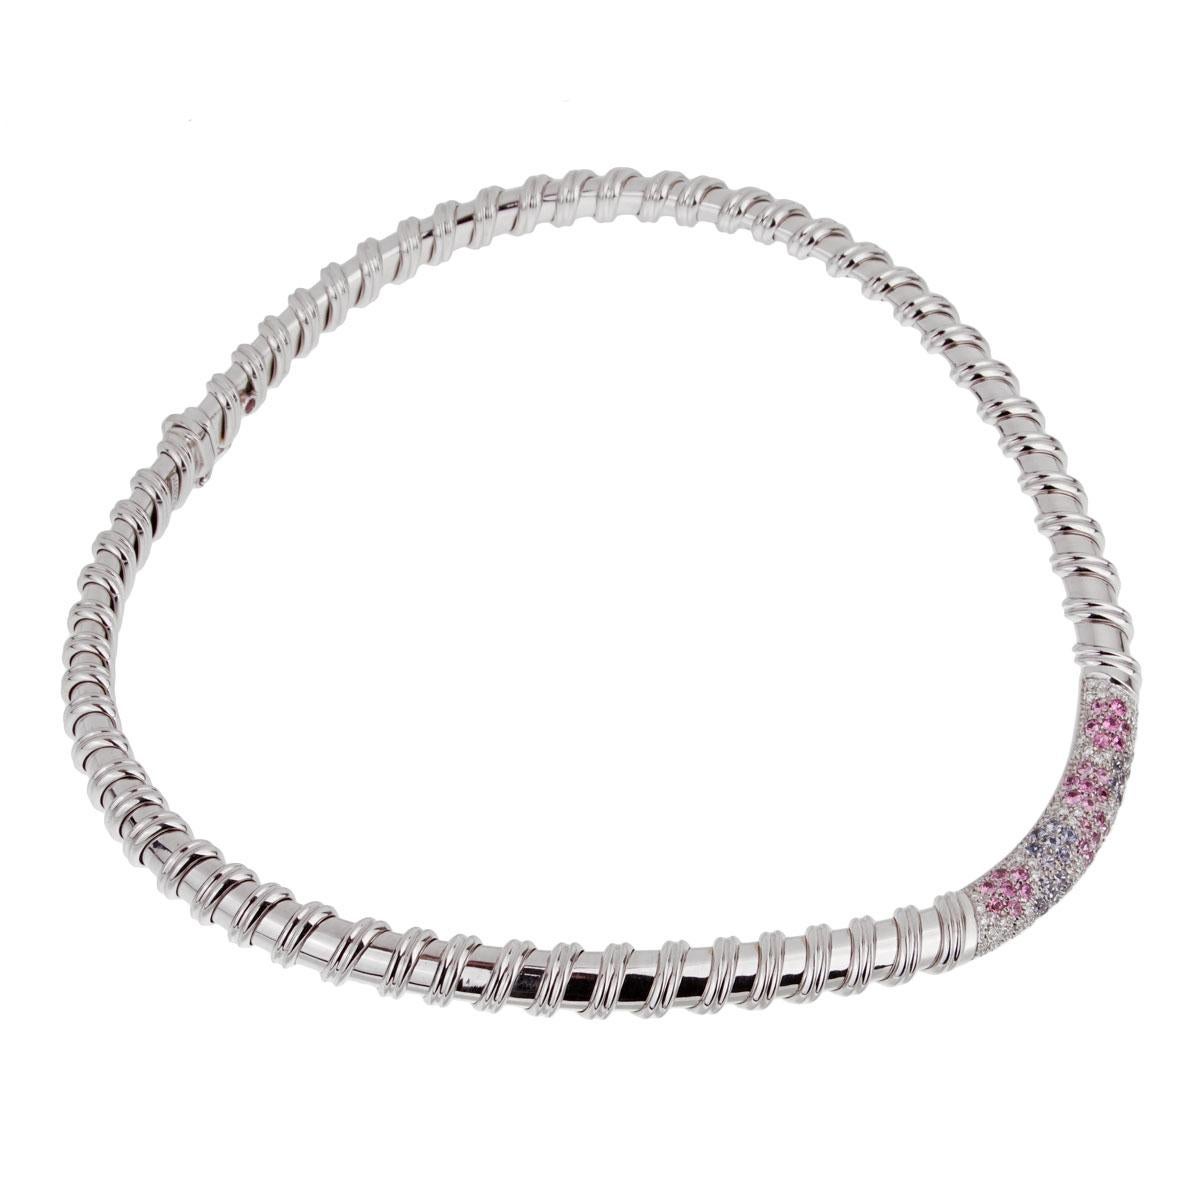 An iconic Roberto Coin necklace from the Nabucco collection, the necklace is set with round brilliant cut diamonds, pink and blue sapphires in shimmering 18k white gold.